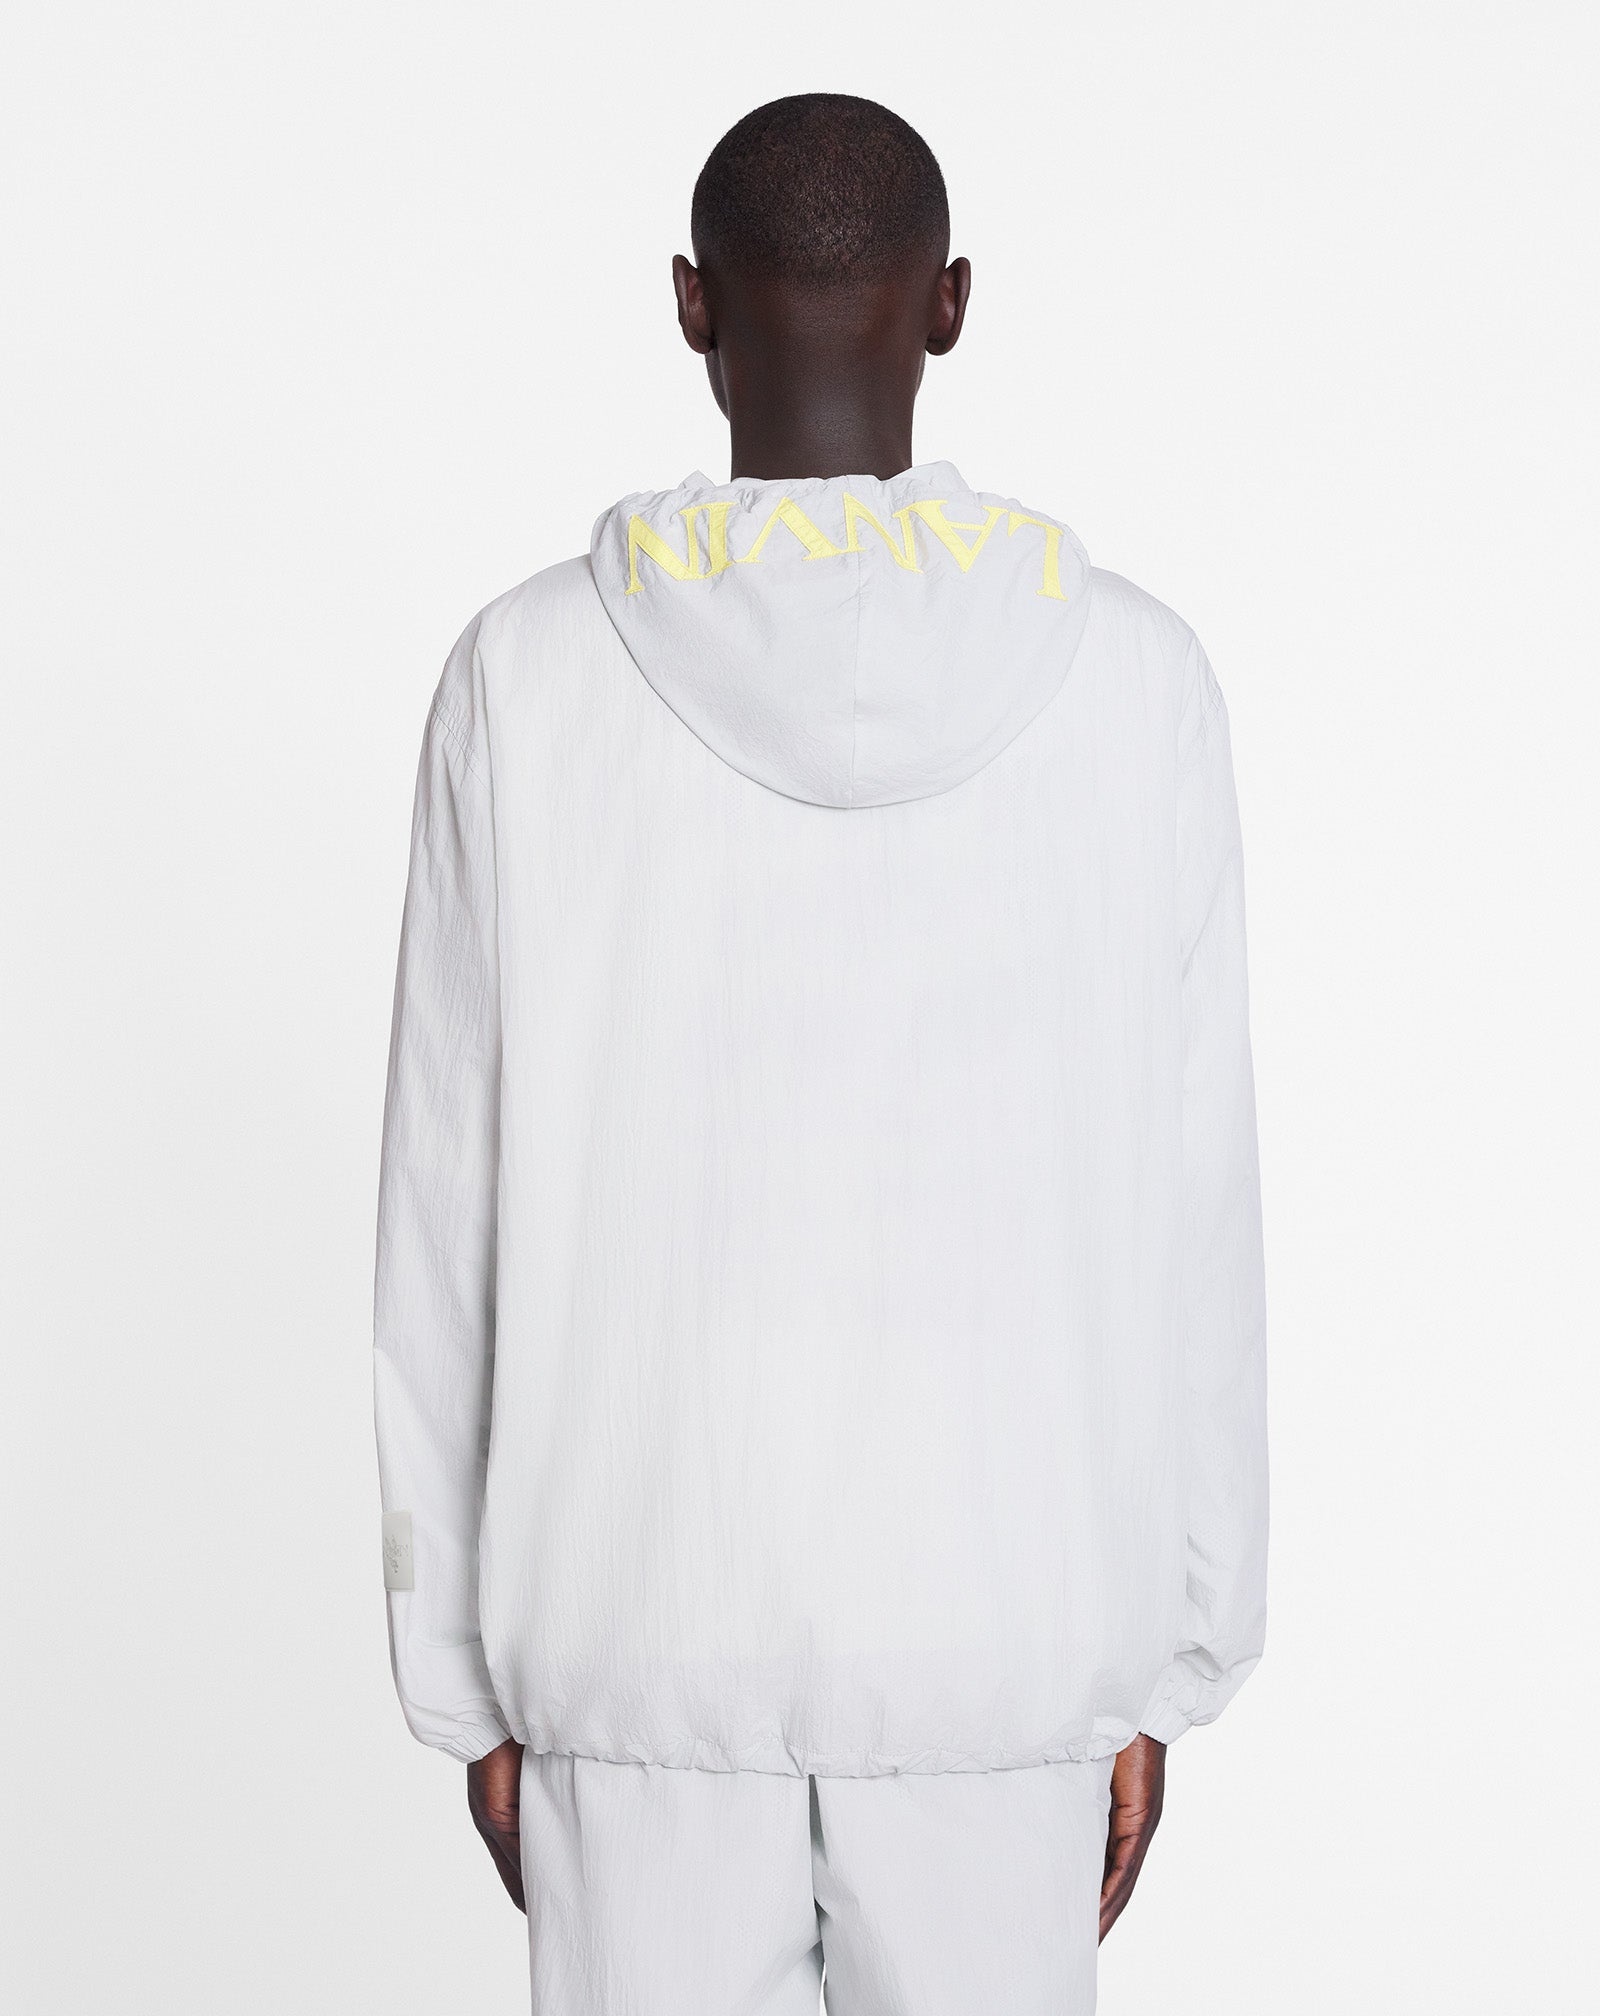 LANVIN X FUTURE ZIPPED HOODIE WITH CONTRASTING STRIPES - 4